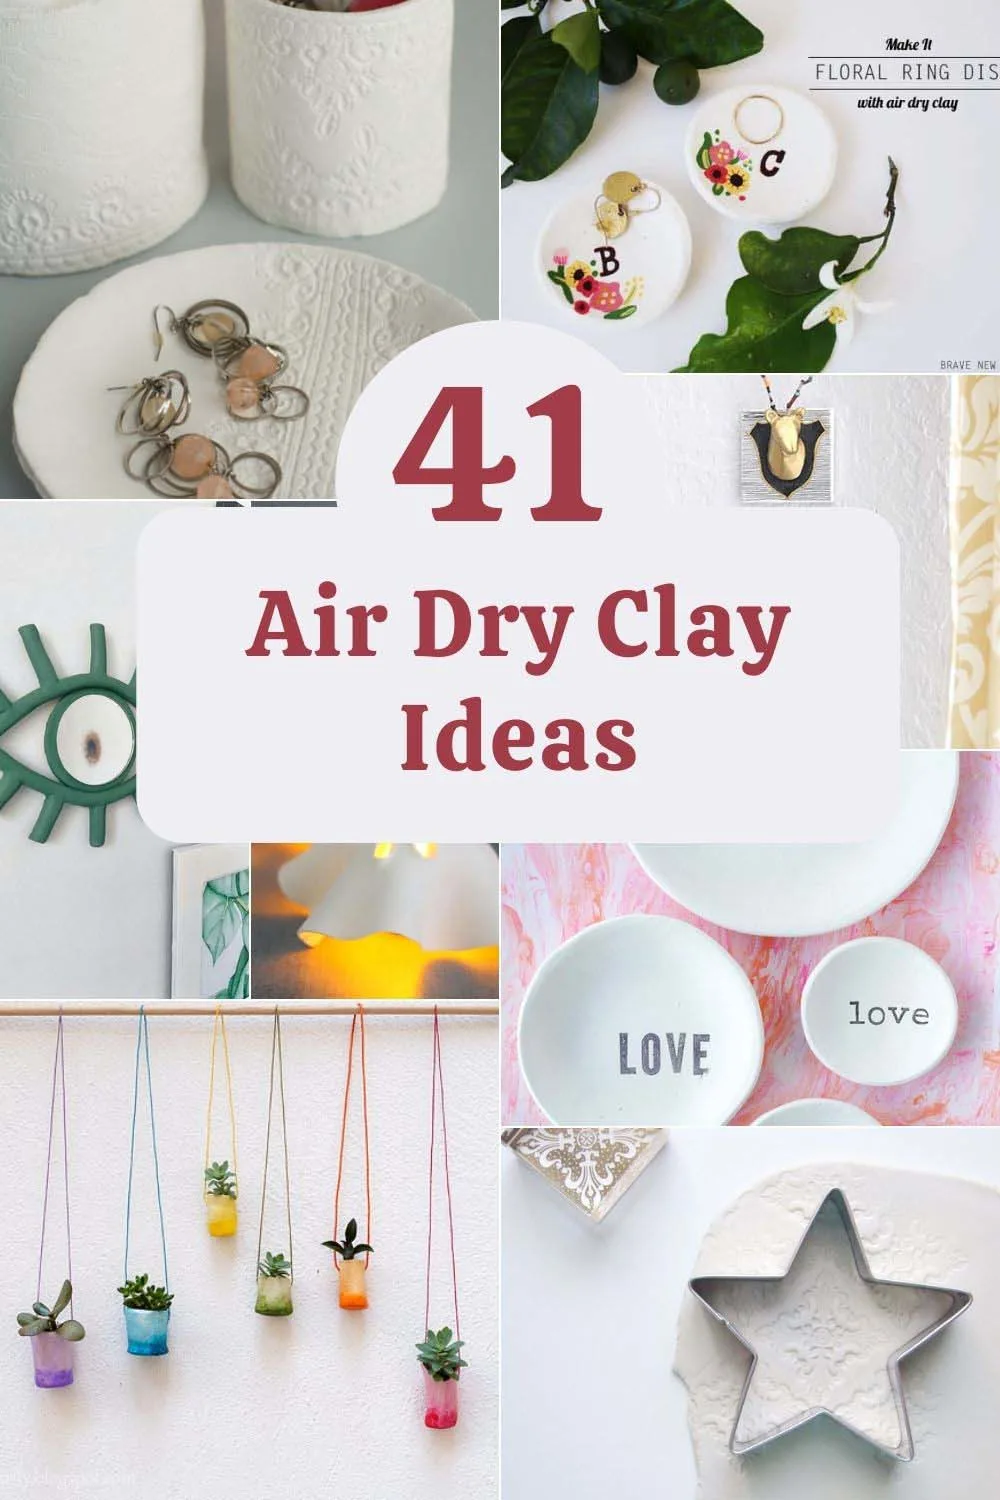 Air Dry Clay Projects for Kids - Red Ted Art - Kids Crafts